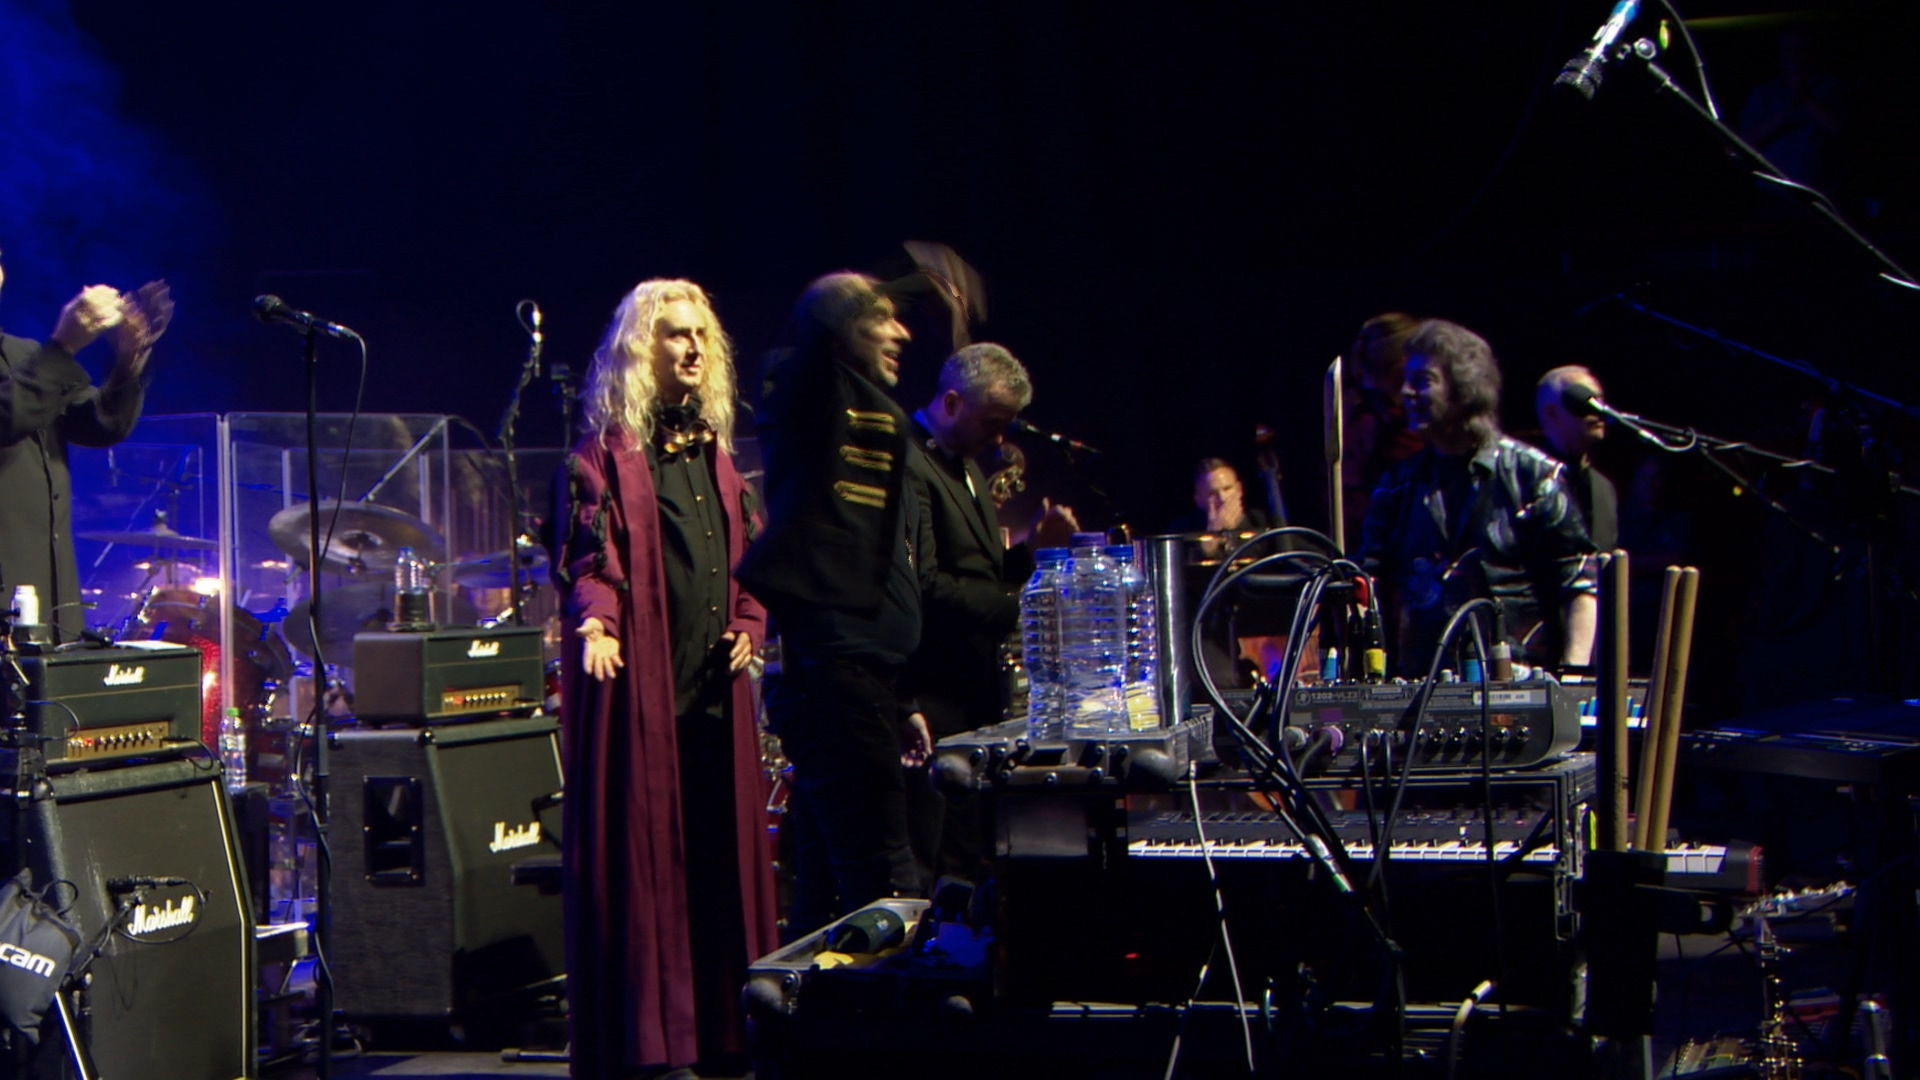 Steve Hackett - Genesis Revisited Band and Orchestra Live at the Royal Festival Hall 2019_20191109_151511.187.jpg